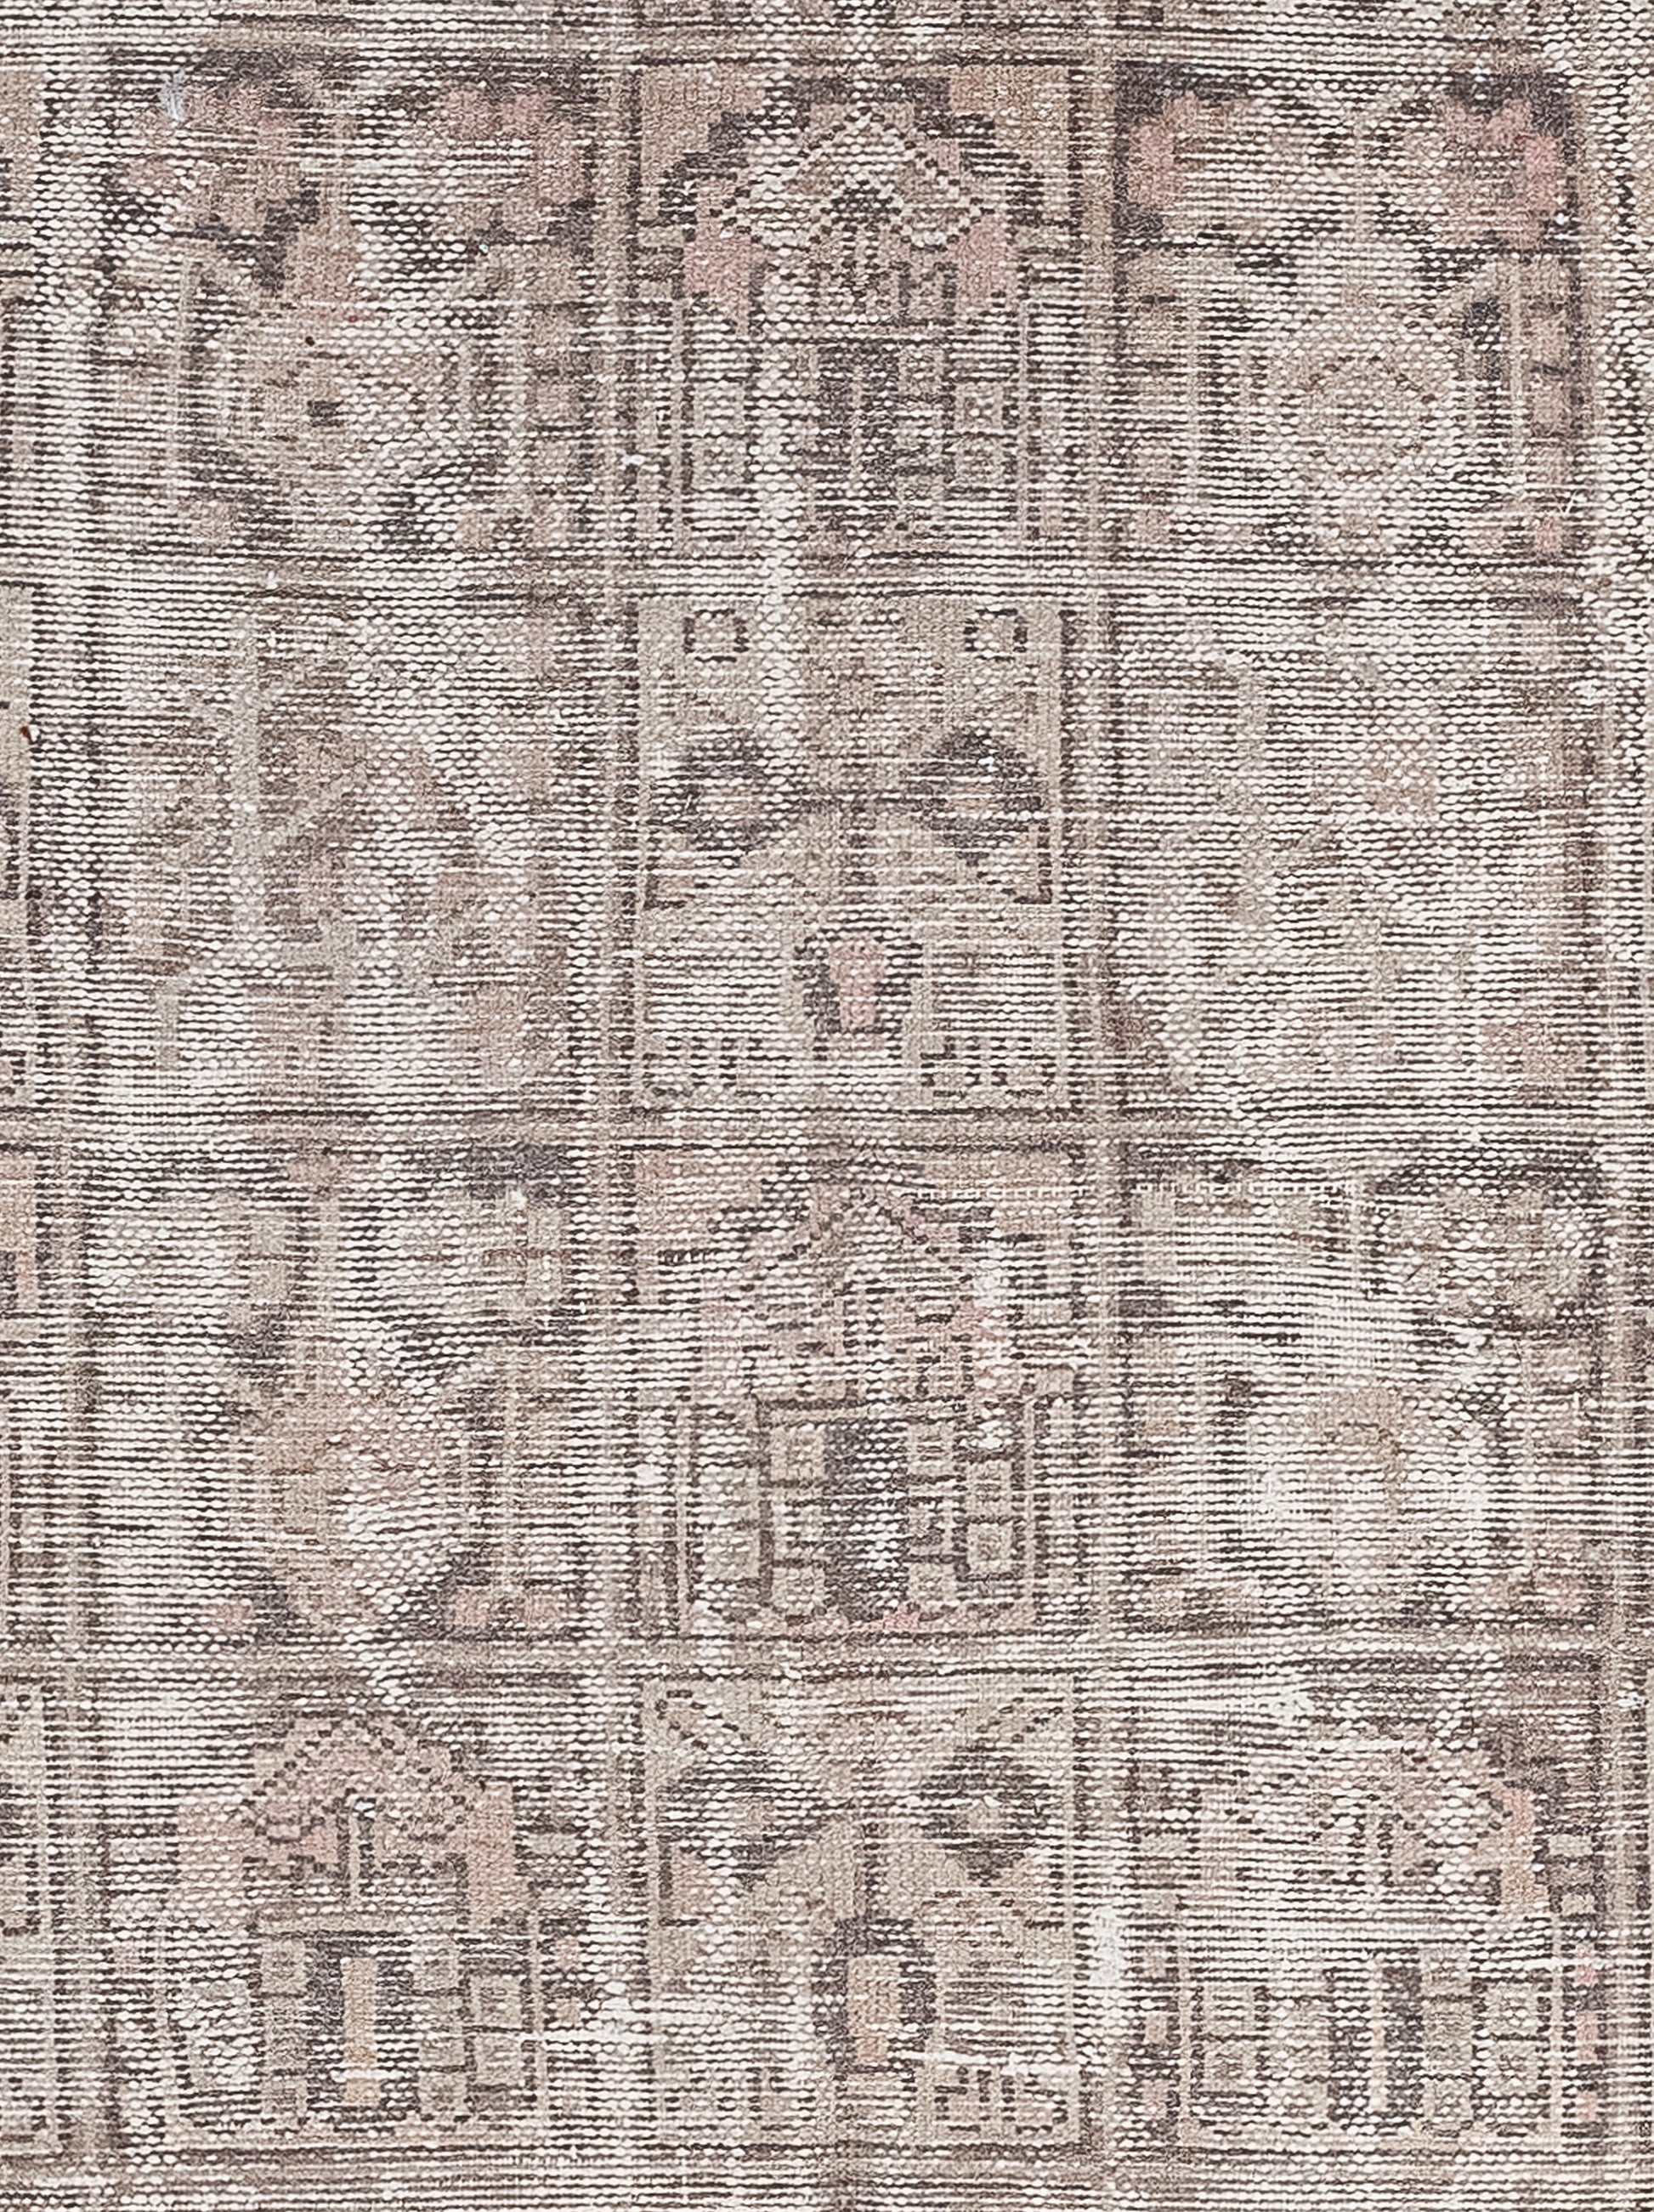 The central design is a 5 x 8 grid with 40 squares alternately illustrating tribal houses, cotton plants, and symbols.